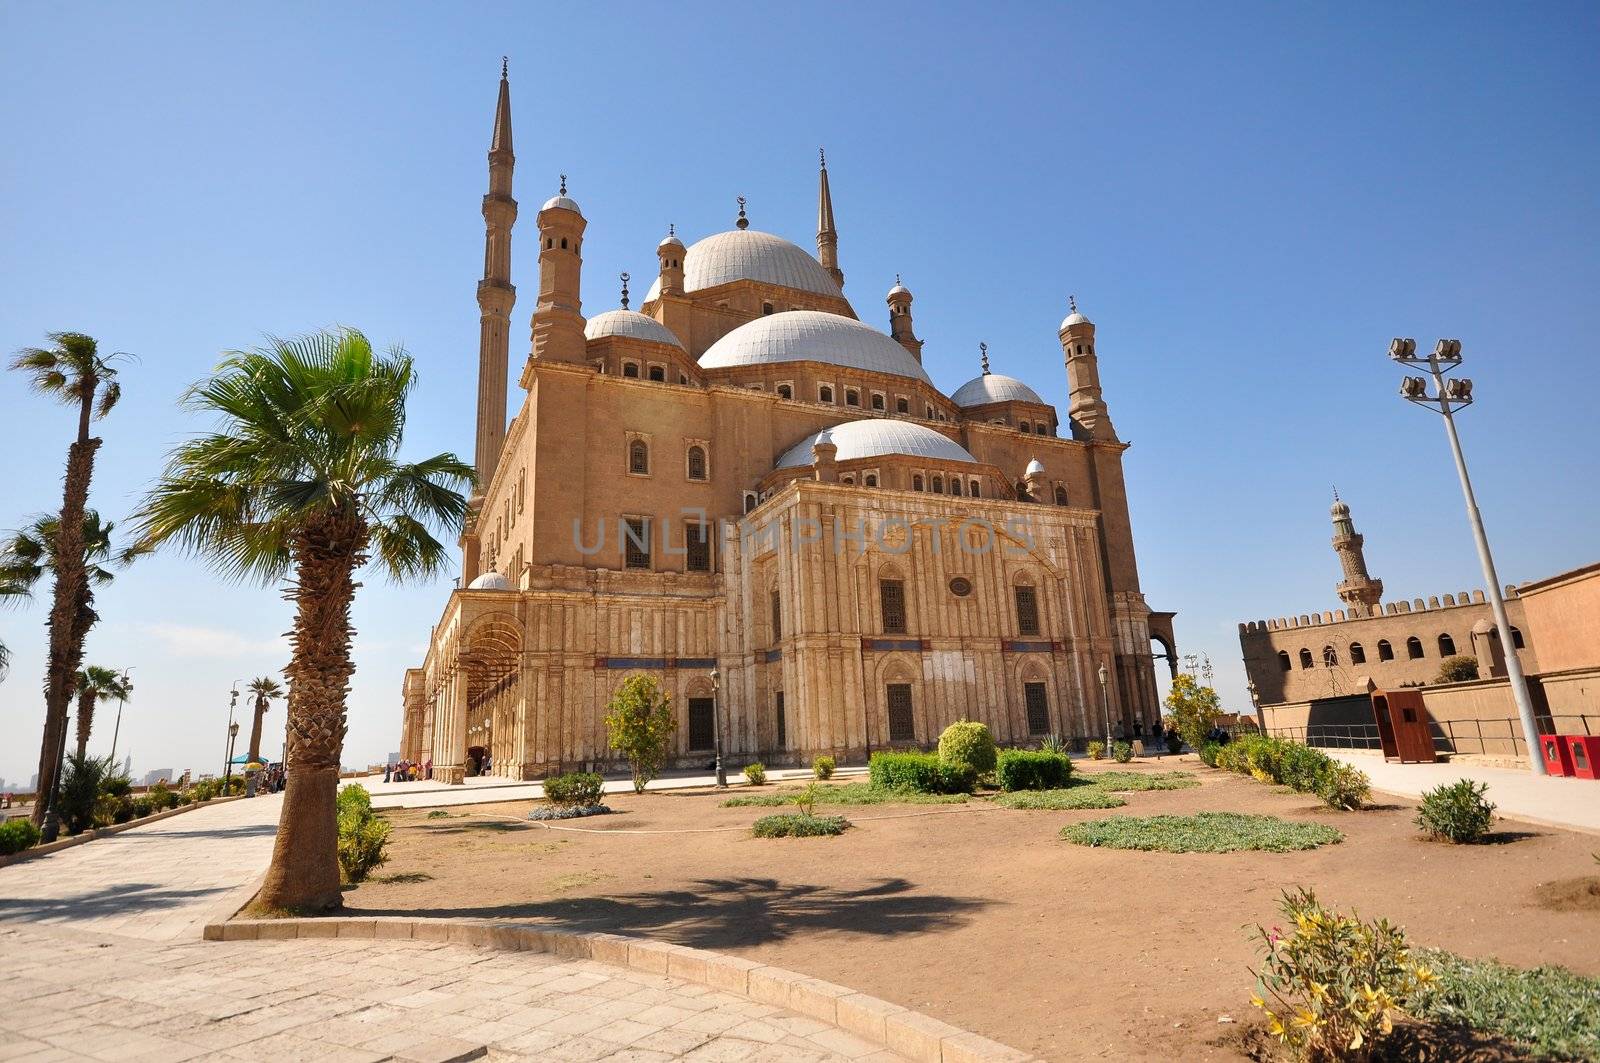 The Mosque of Muhammad Ali Pasha or Alabaster Mosque is a mosque situated in the Citadel of Cairo in Egypt and commissioned by Muhammad Ali Pasha between 1830 and 1848.